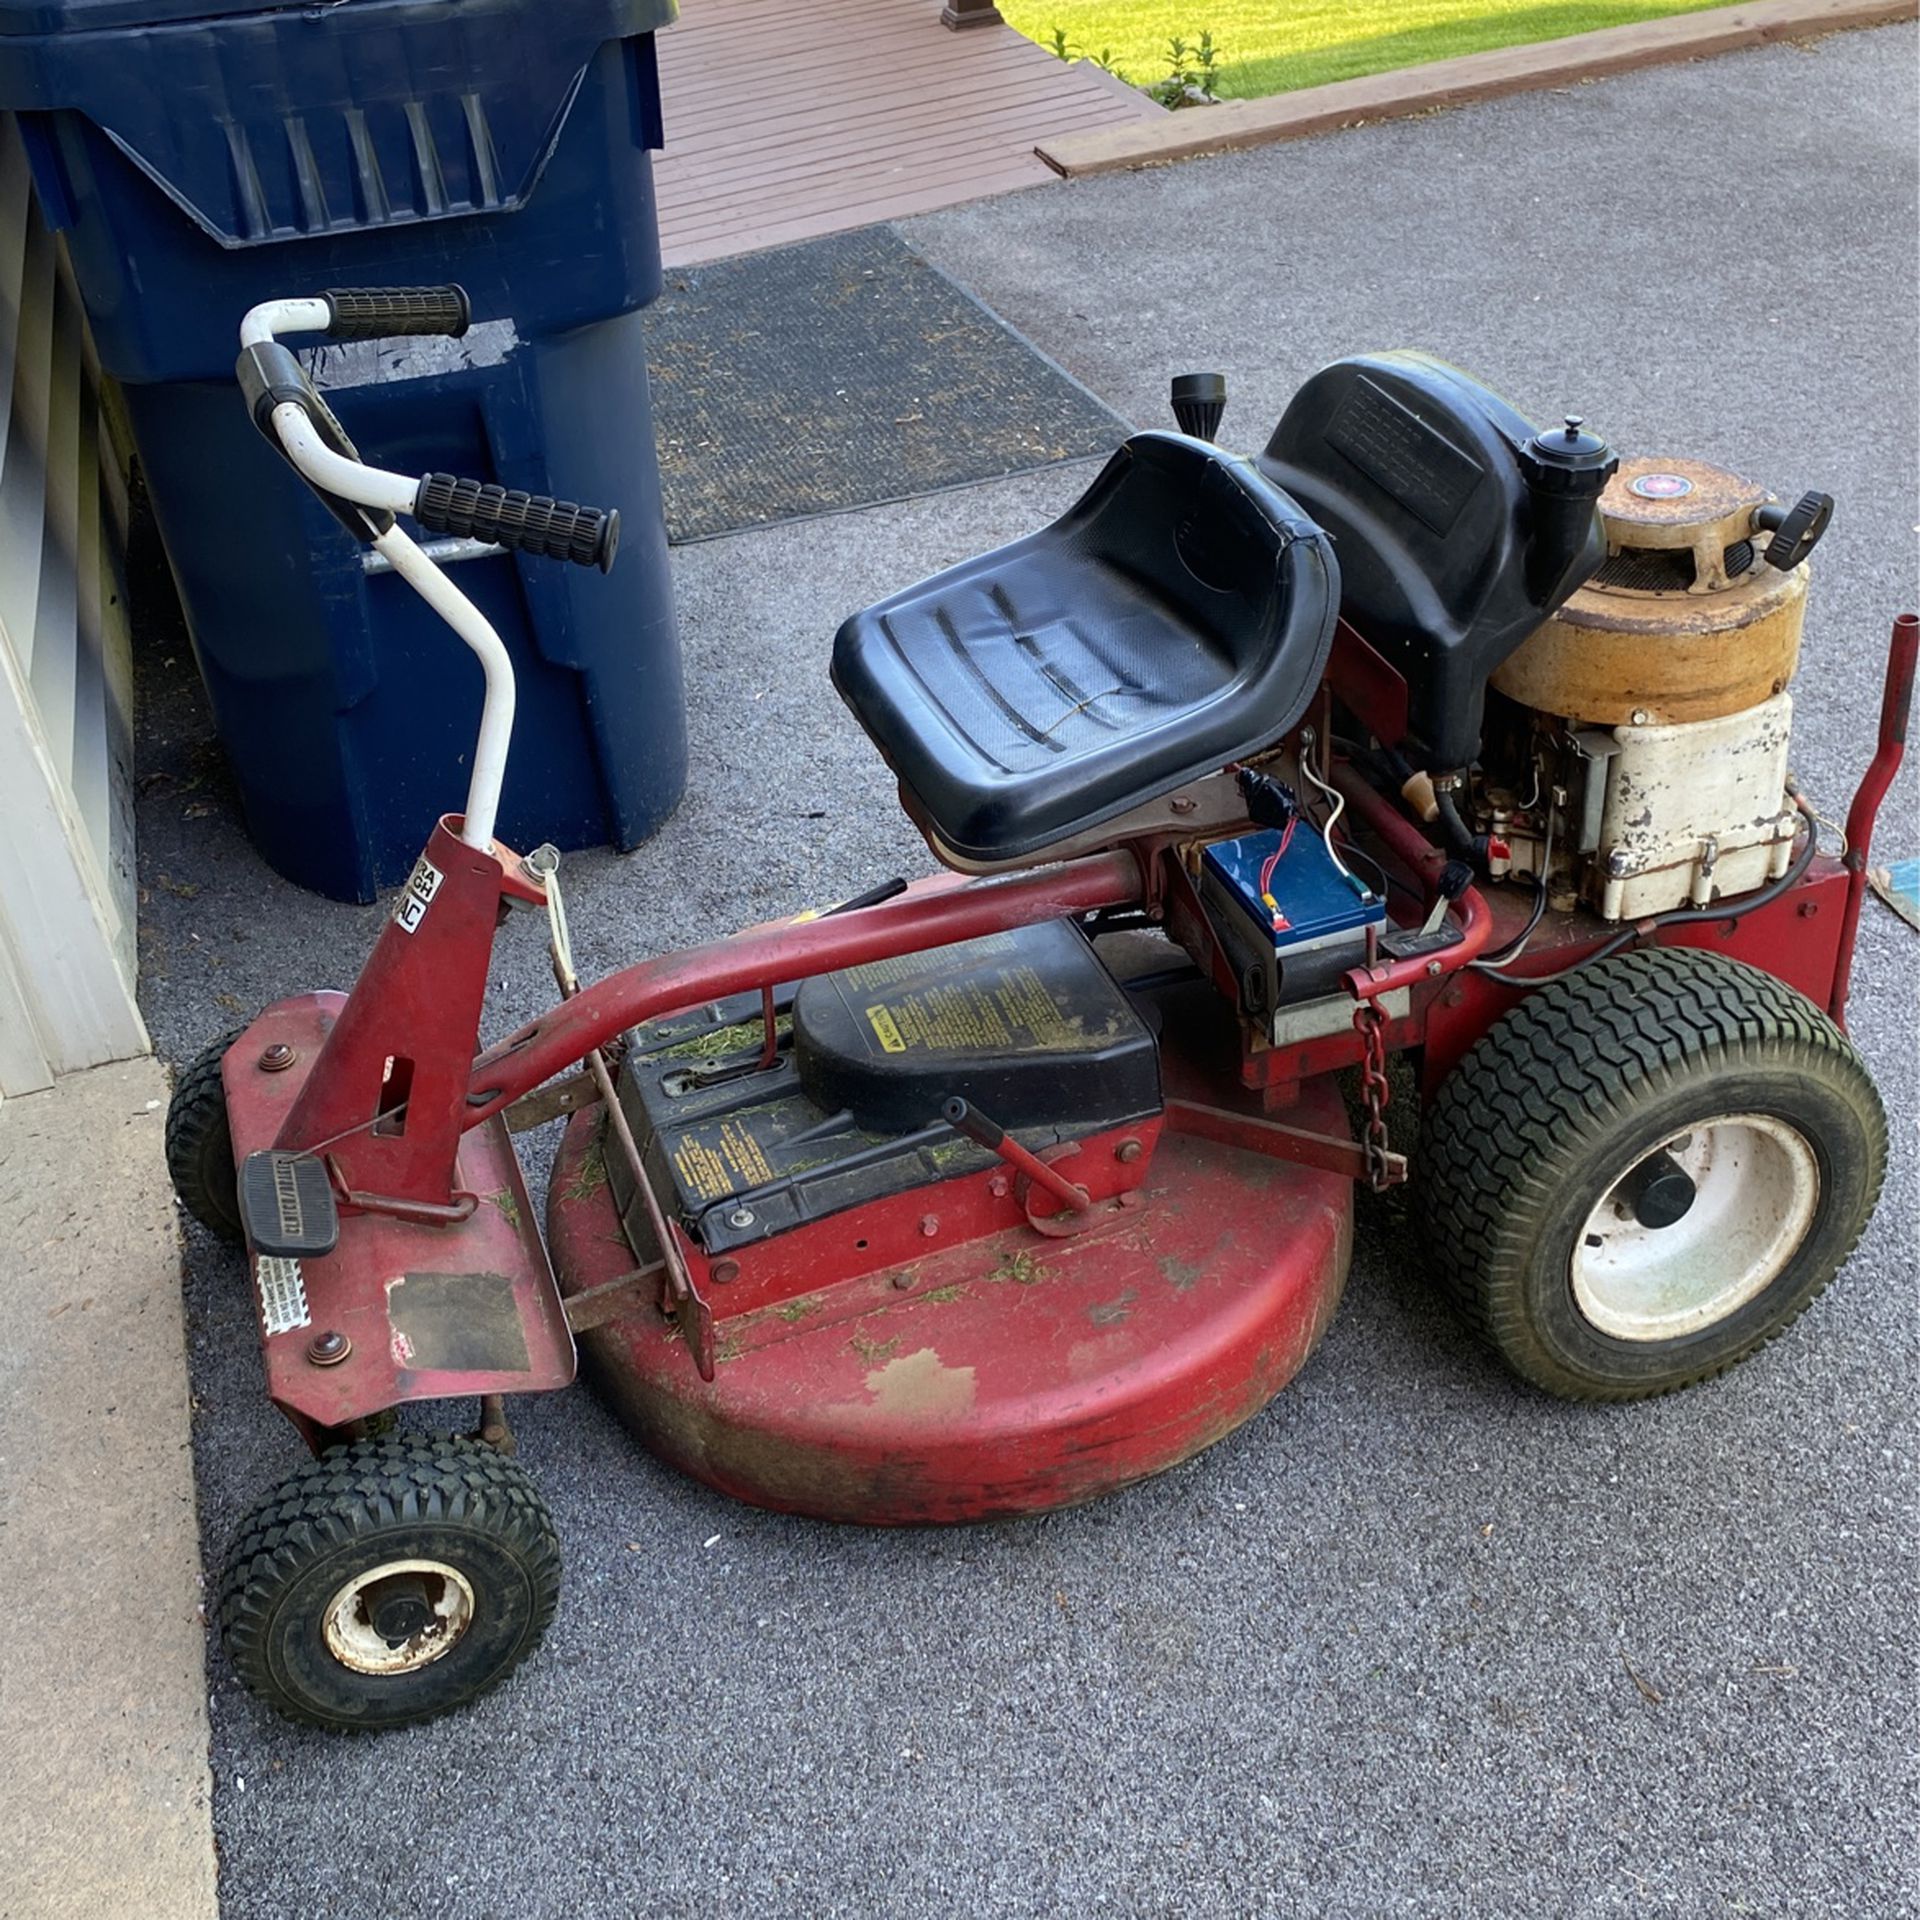 Riding mower with mulching deck and ,new oil newer tires newer drive belt new blade